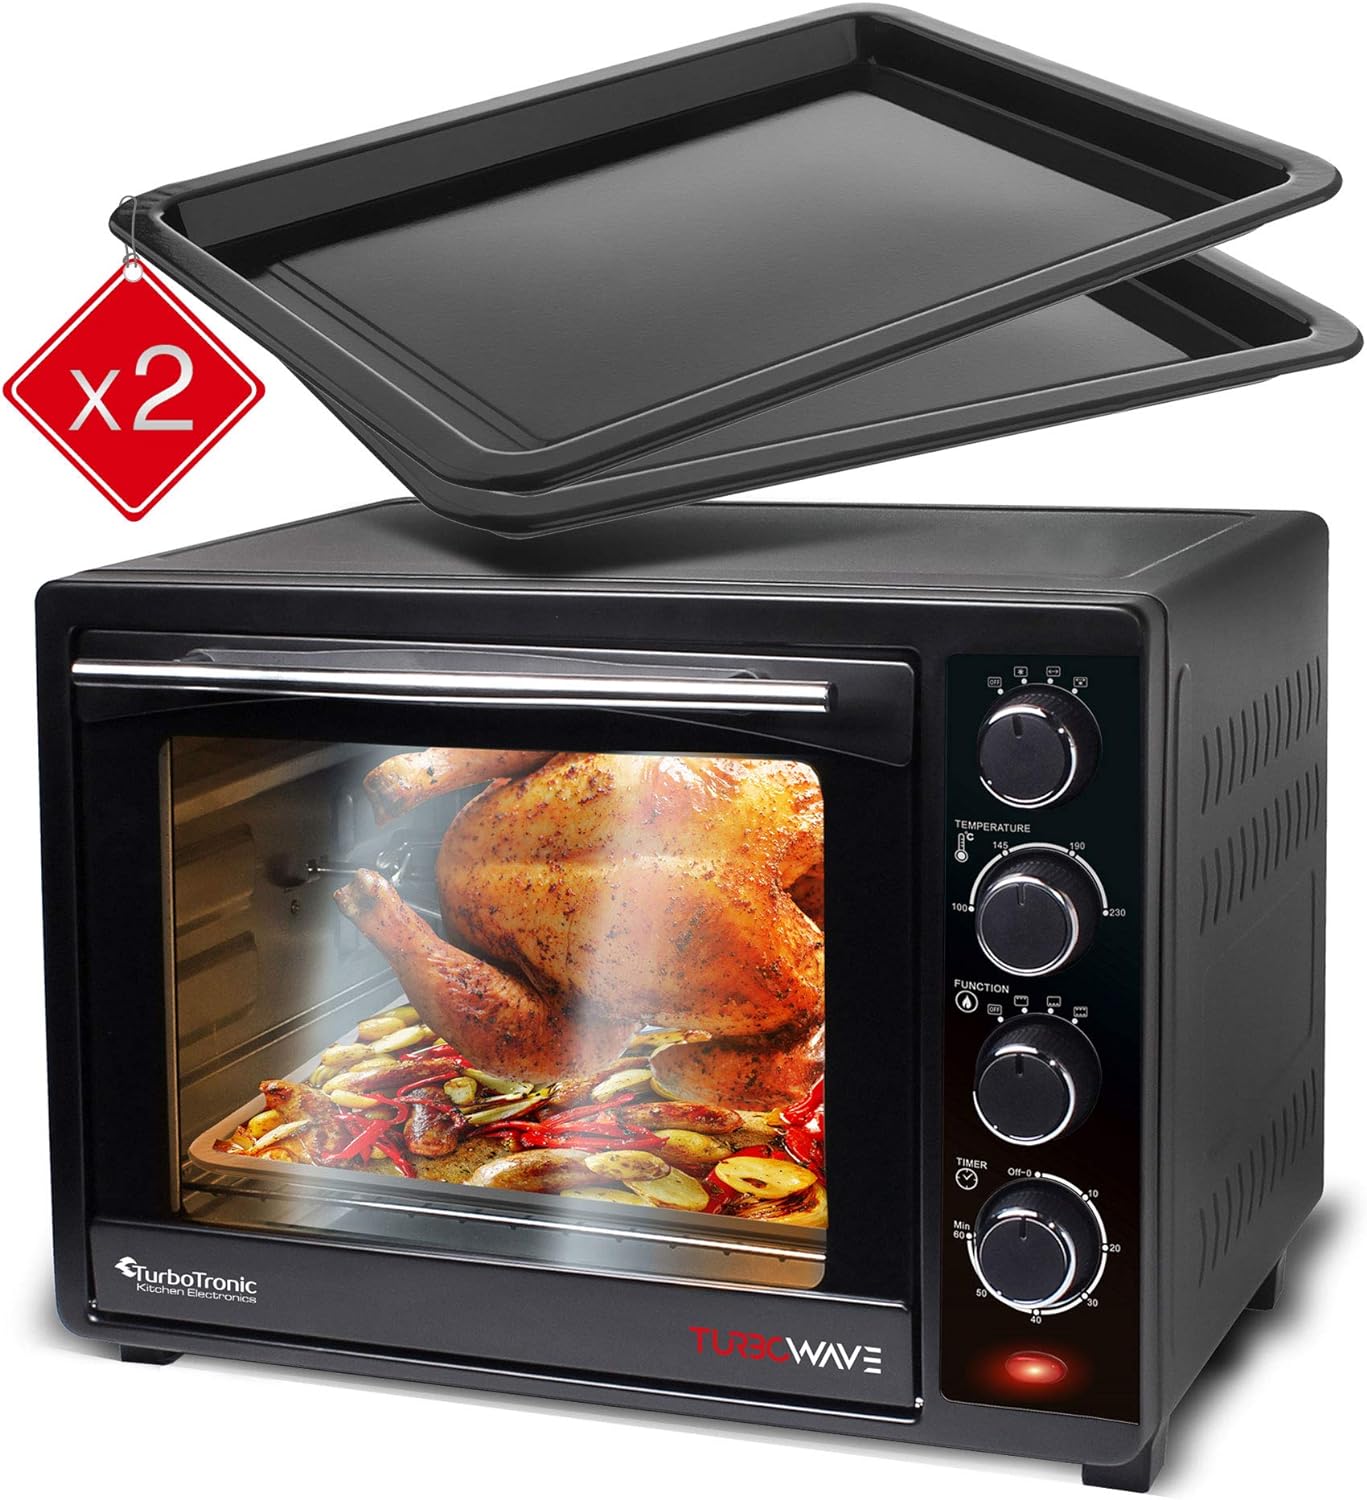 TurboTronic Mini Oven with Double Glazed Electric Grill Pizza Oven with Timer Function